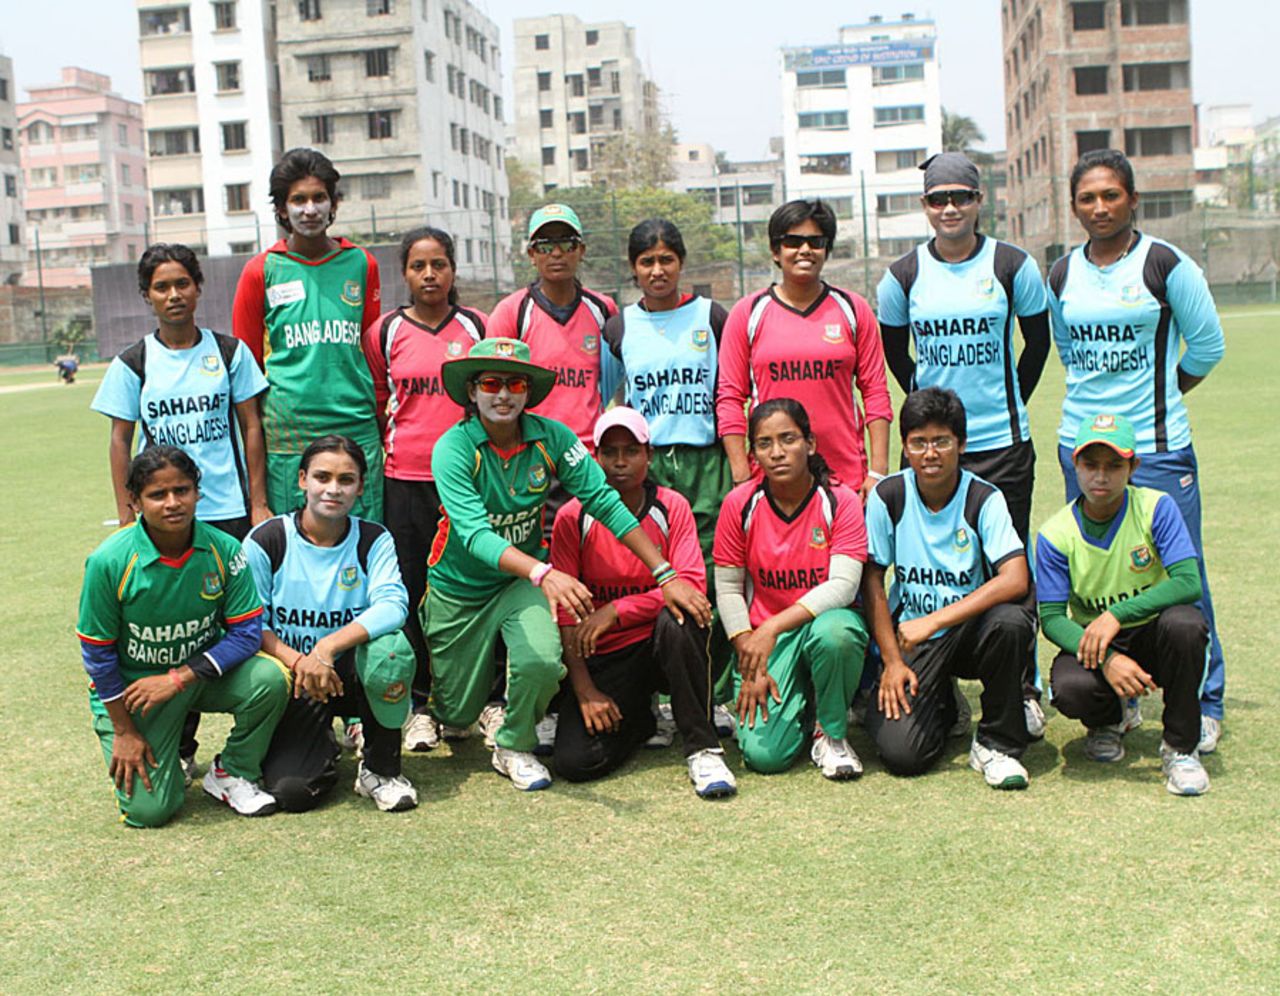 Bangladesh players at a photo session during training, Mirpur, March 30, 2013